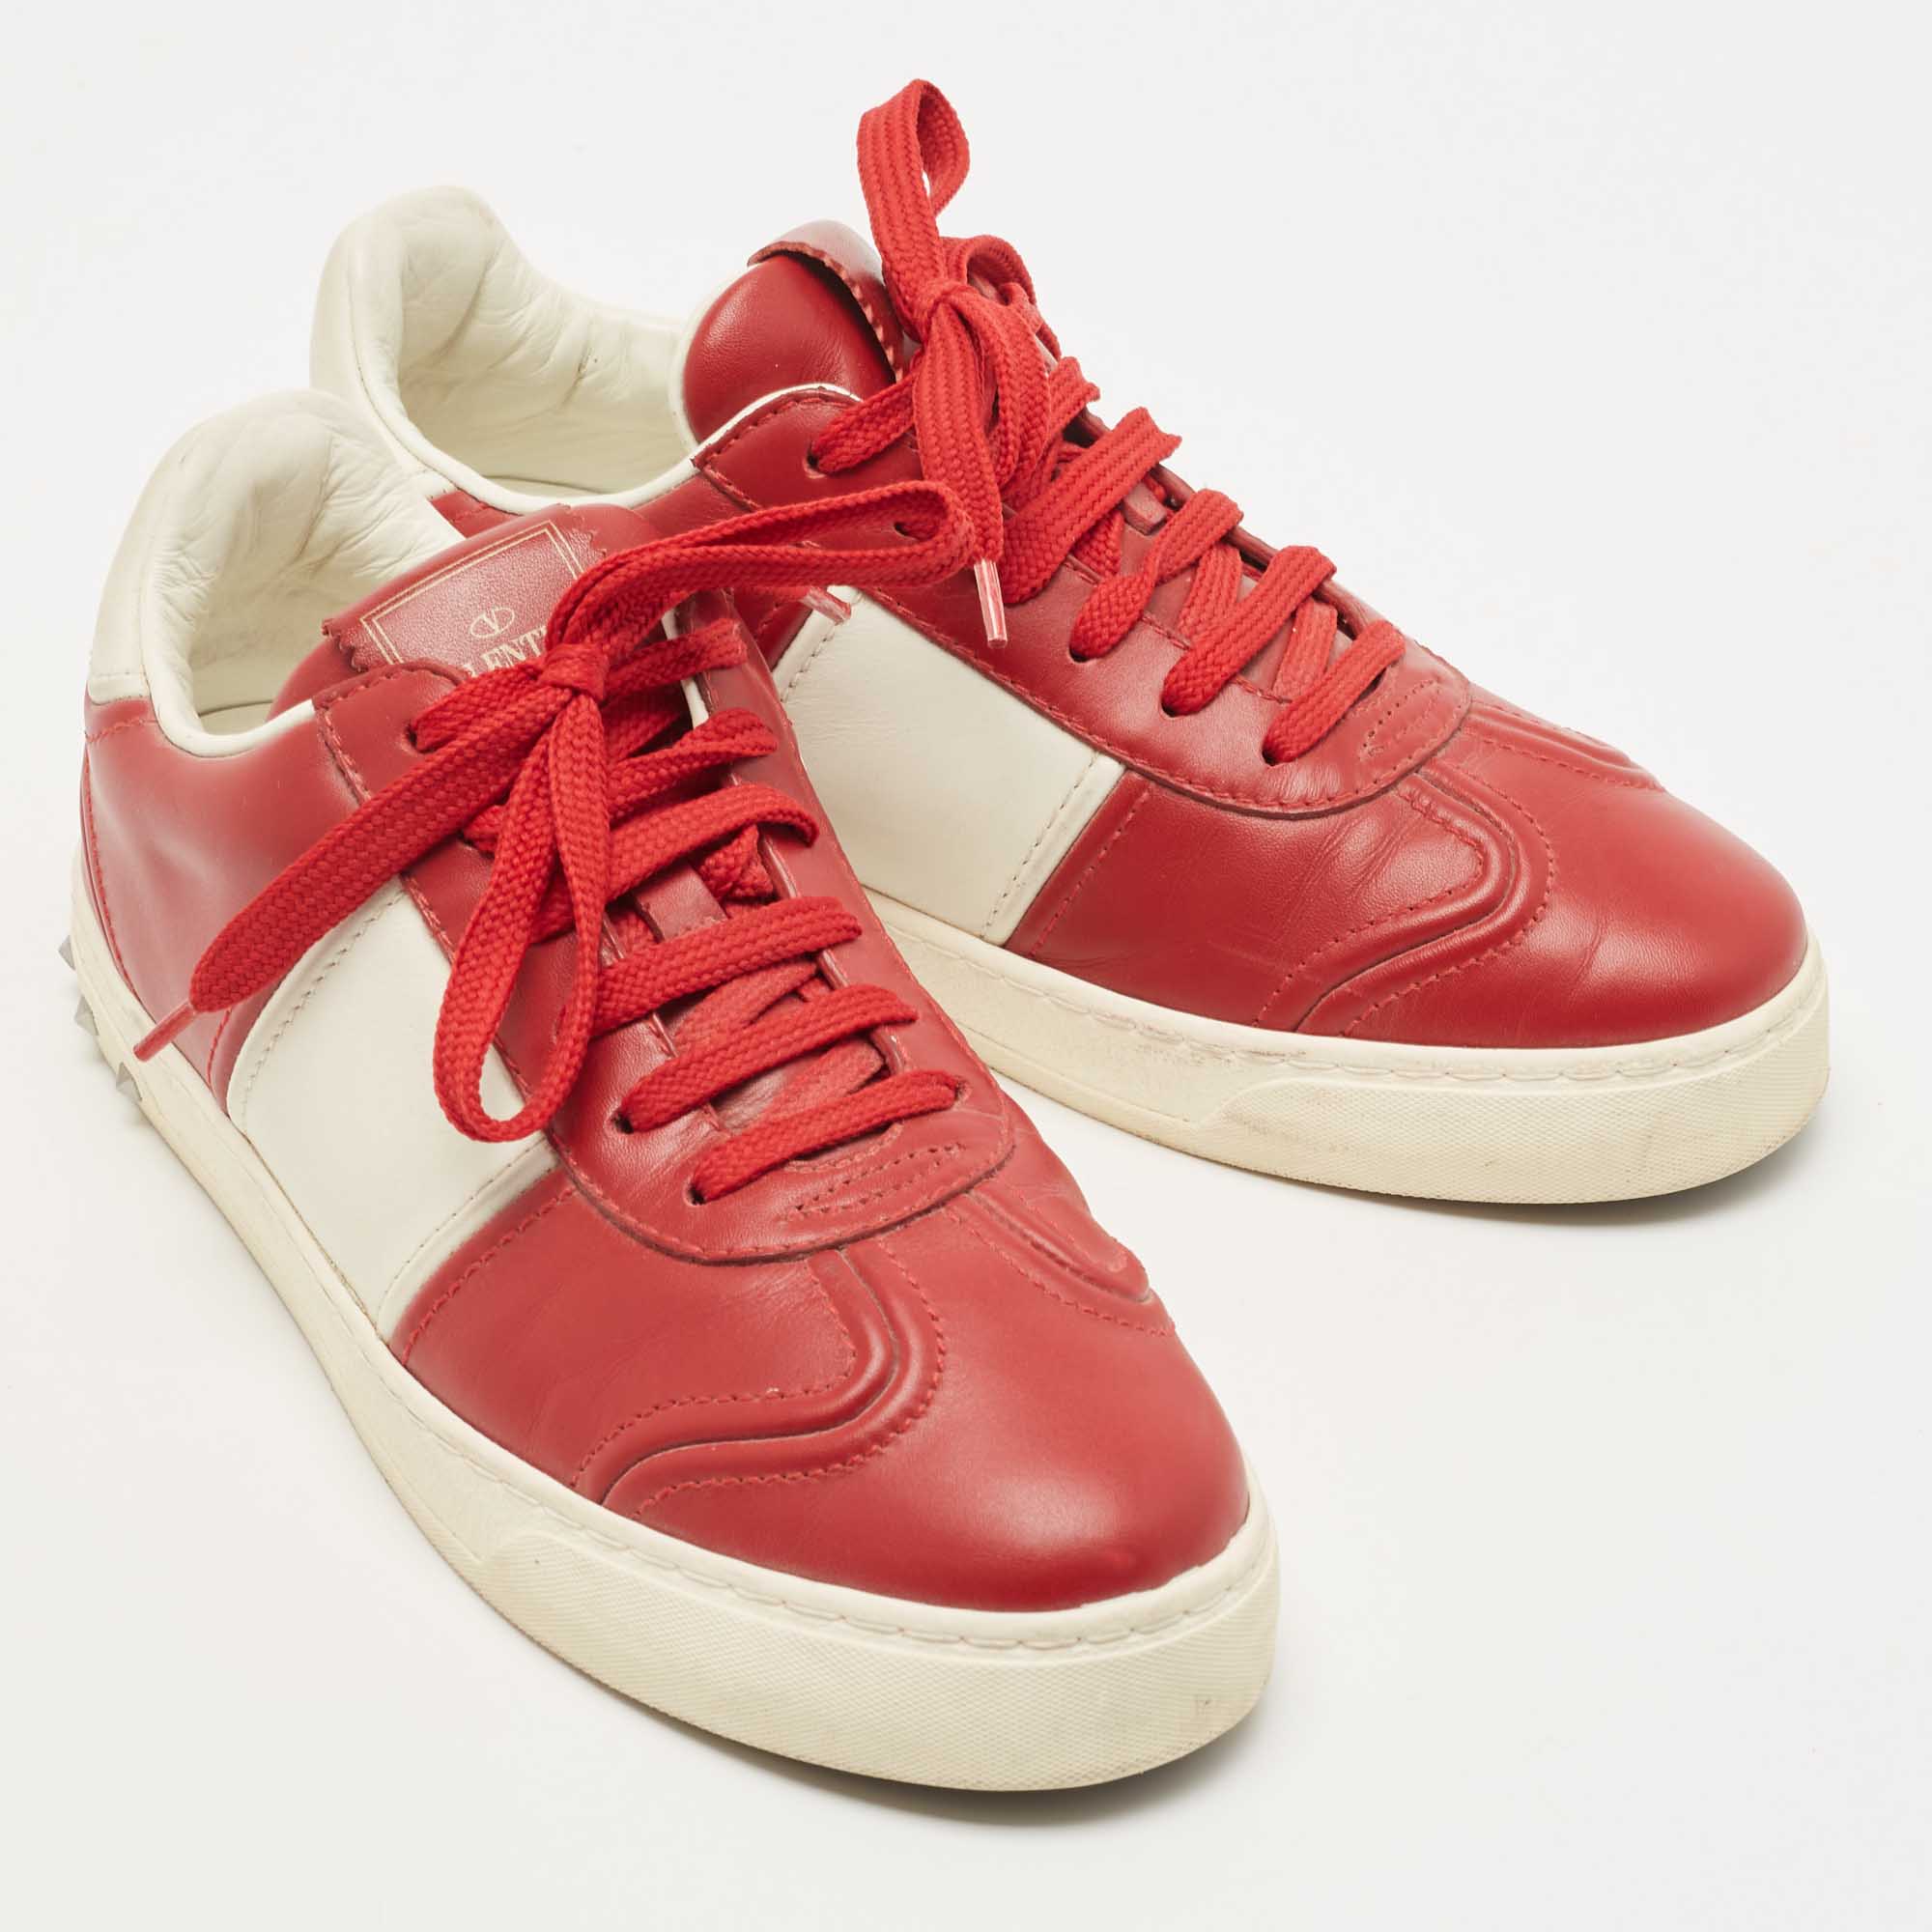 Valentino Red Leather Fly Crew Low Top Sneakers Size 38.5